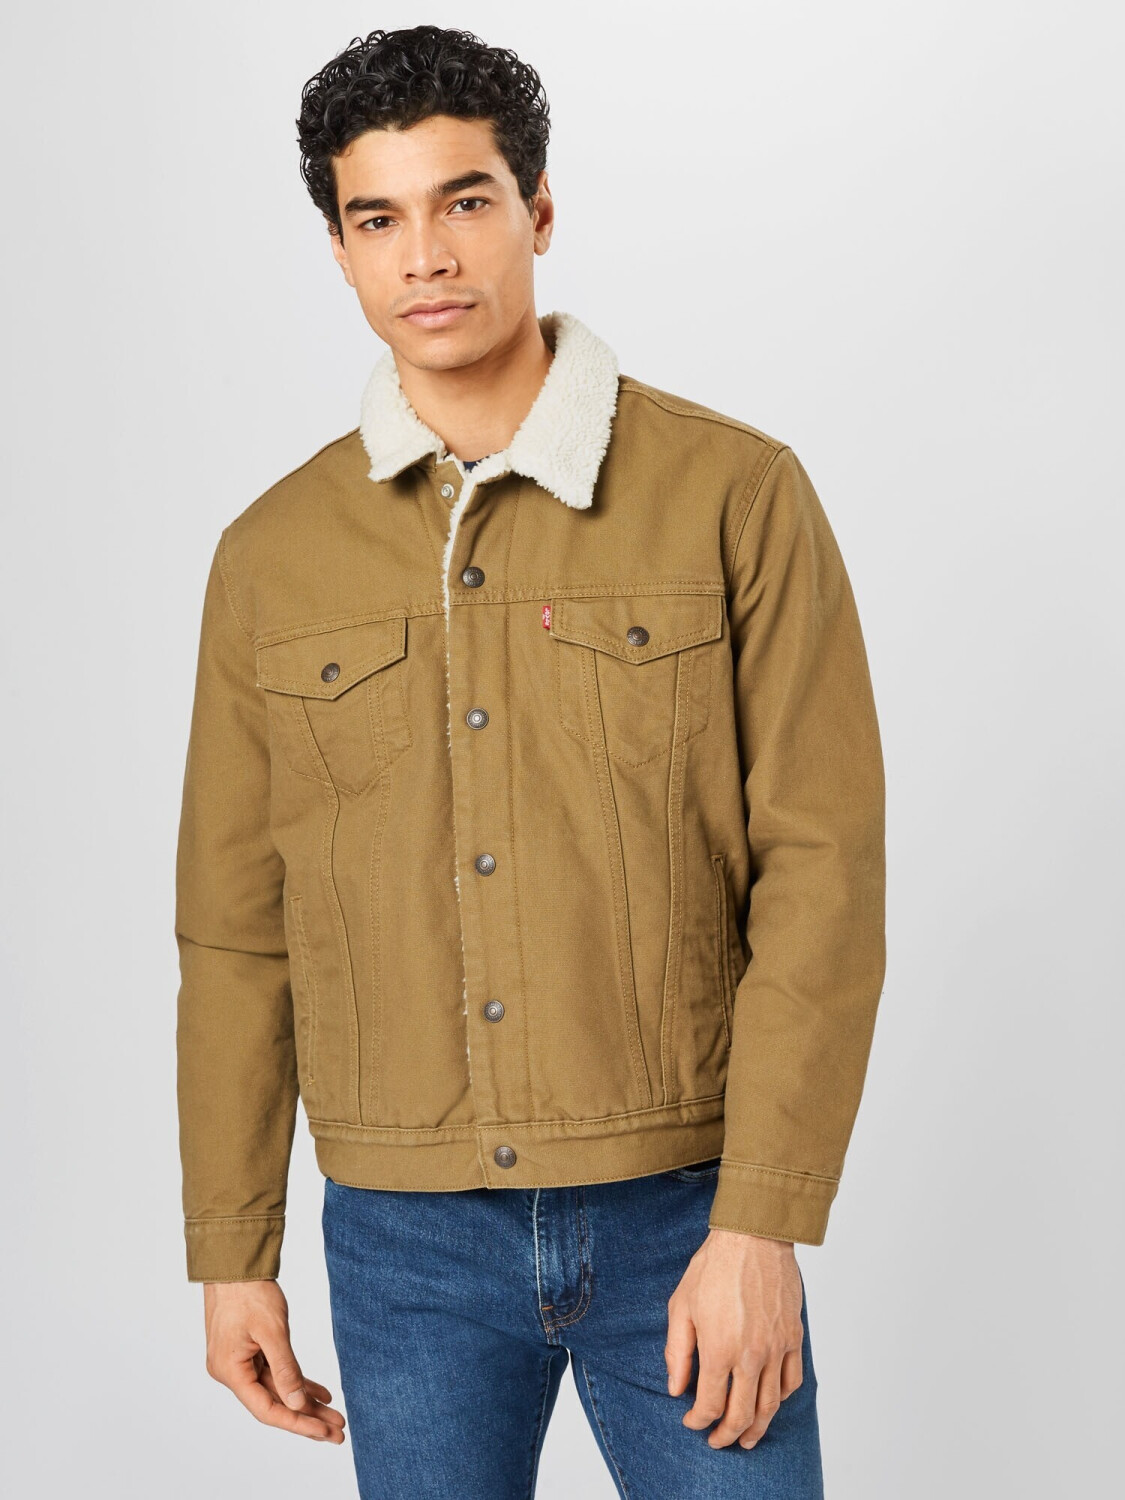 Buy Levi's Type 3 Sherpa Trucker Jacket cougar canvas from £82.50 ...